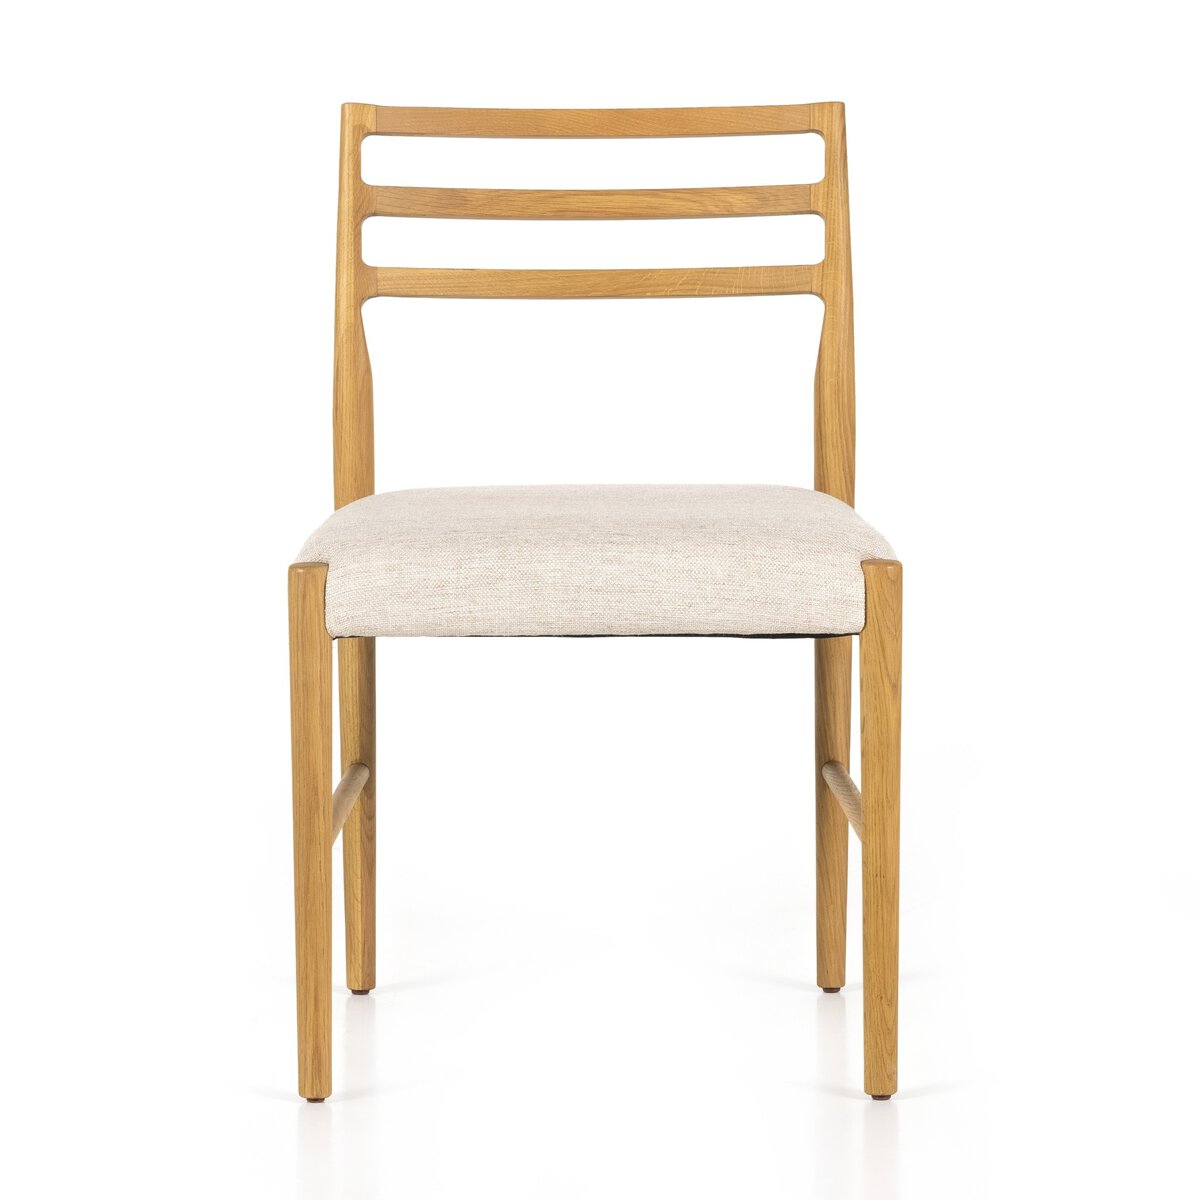 Glenmore Dining Chair Light OakDining Chairs Four Hands Light Oak   Four Hands, Mid Century Modern Furniture, Old Bones Furniture Company, Old Bones Co, Modern Mid Century, Designer Furniture, Furniture Sale, Warehouse Furniture Sale, Glenmore Dining Chair Sale, https://www.oldbonesco.com/